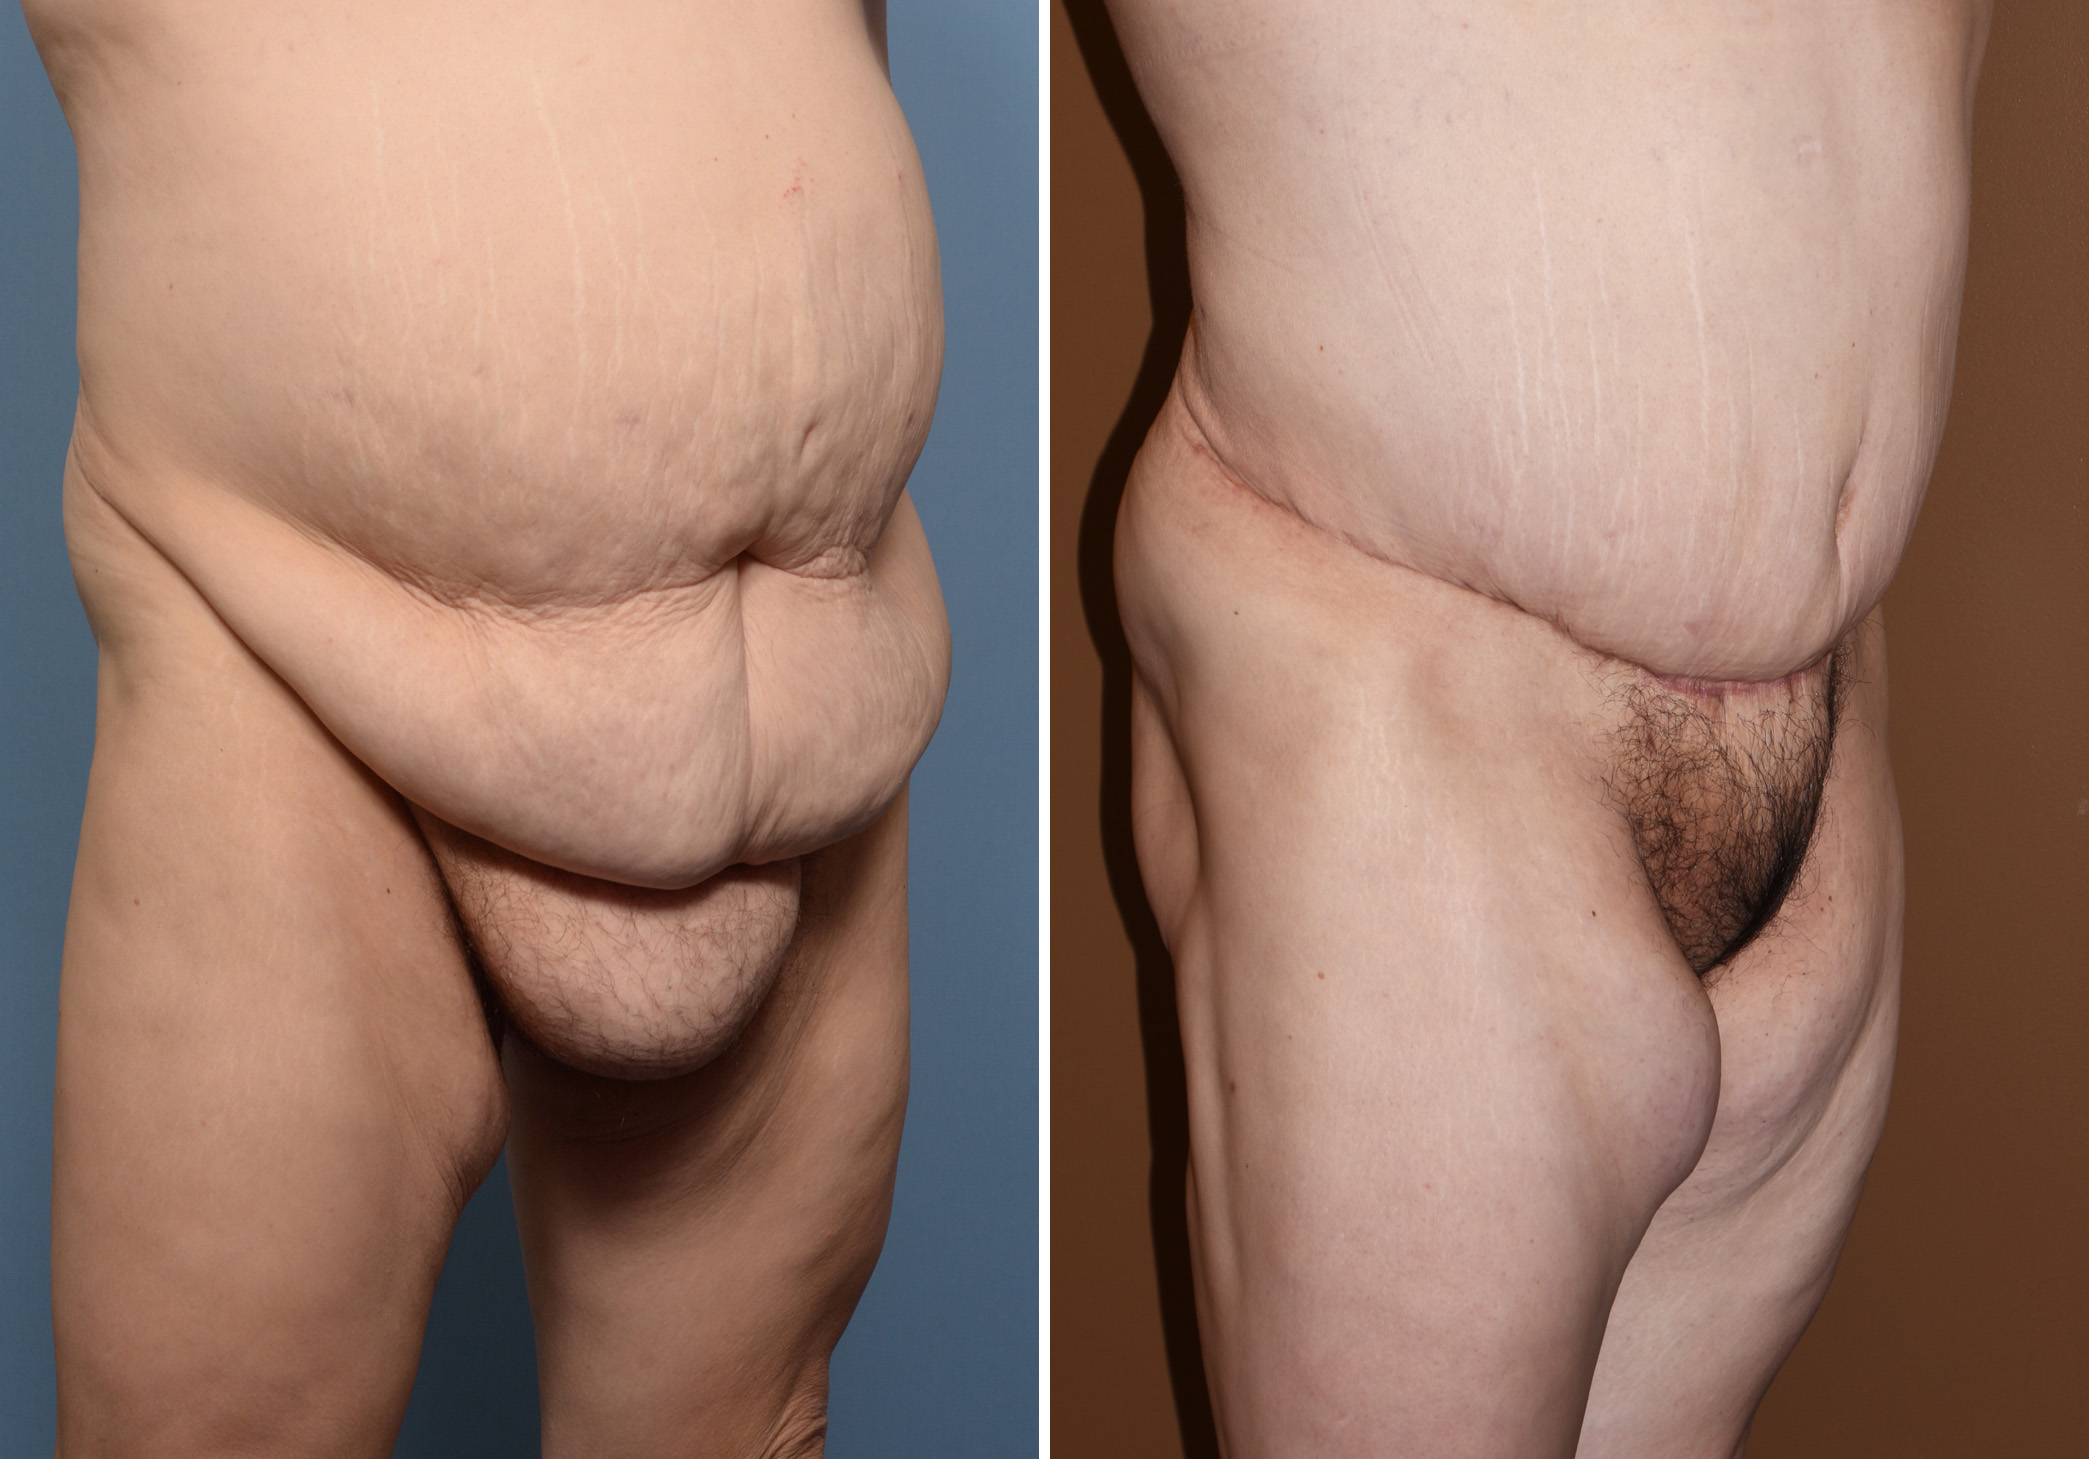 https://exploreplasticsurgery.com/wp-content/uploads/2009/04/Abdominal-Panniculectomy-and-Pubic-Lift-result-oblique-view-Dr-Barry-Eppley-Indianapolis.jpg